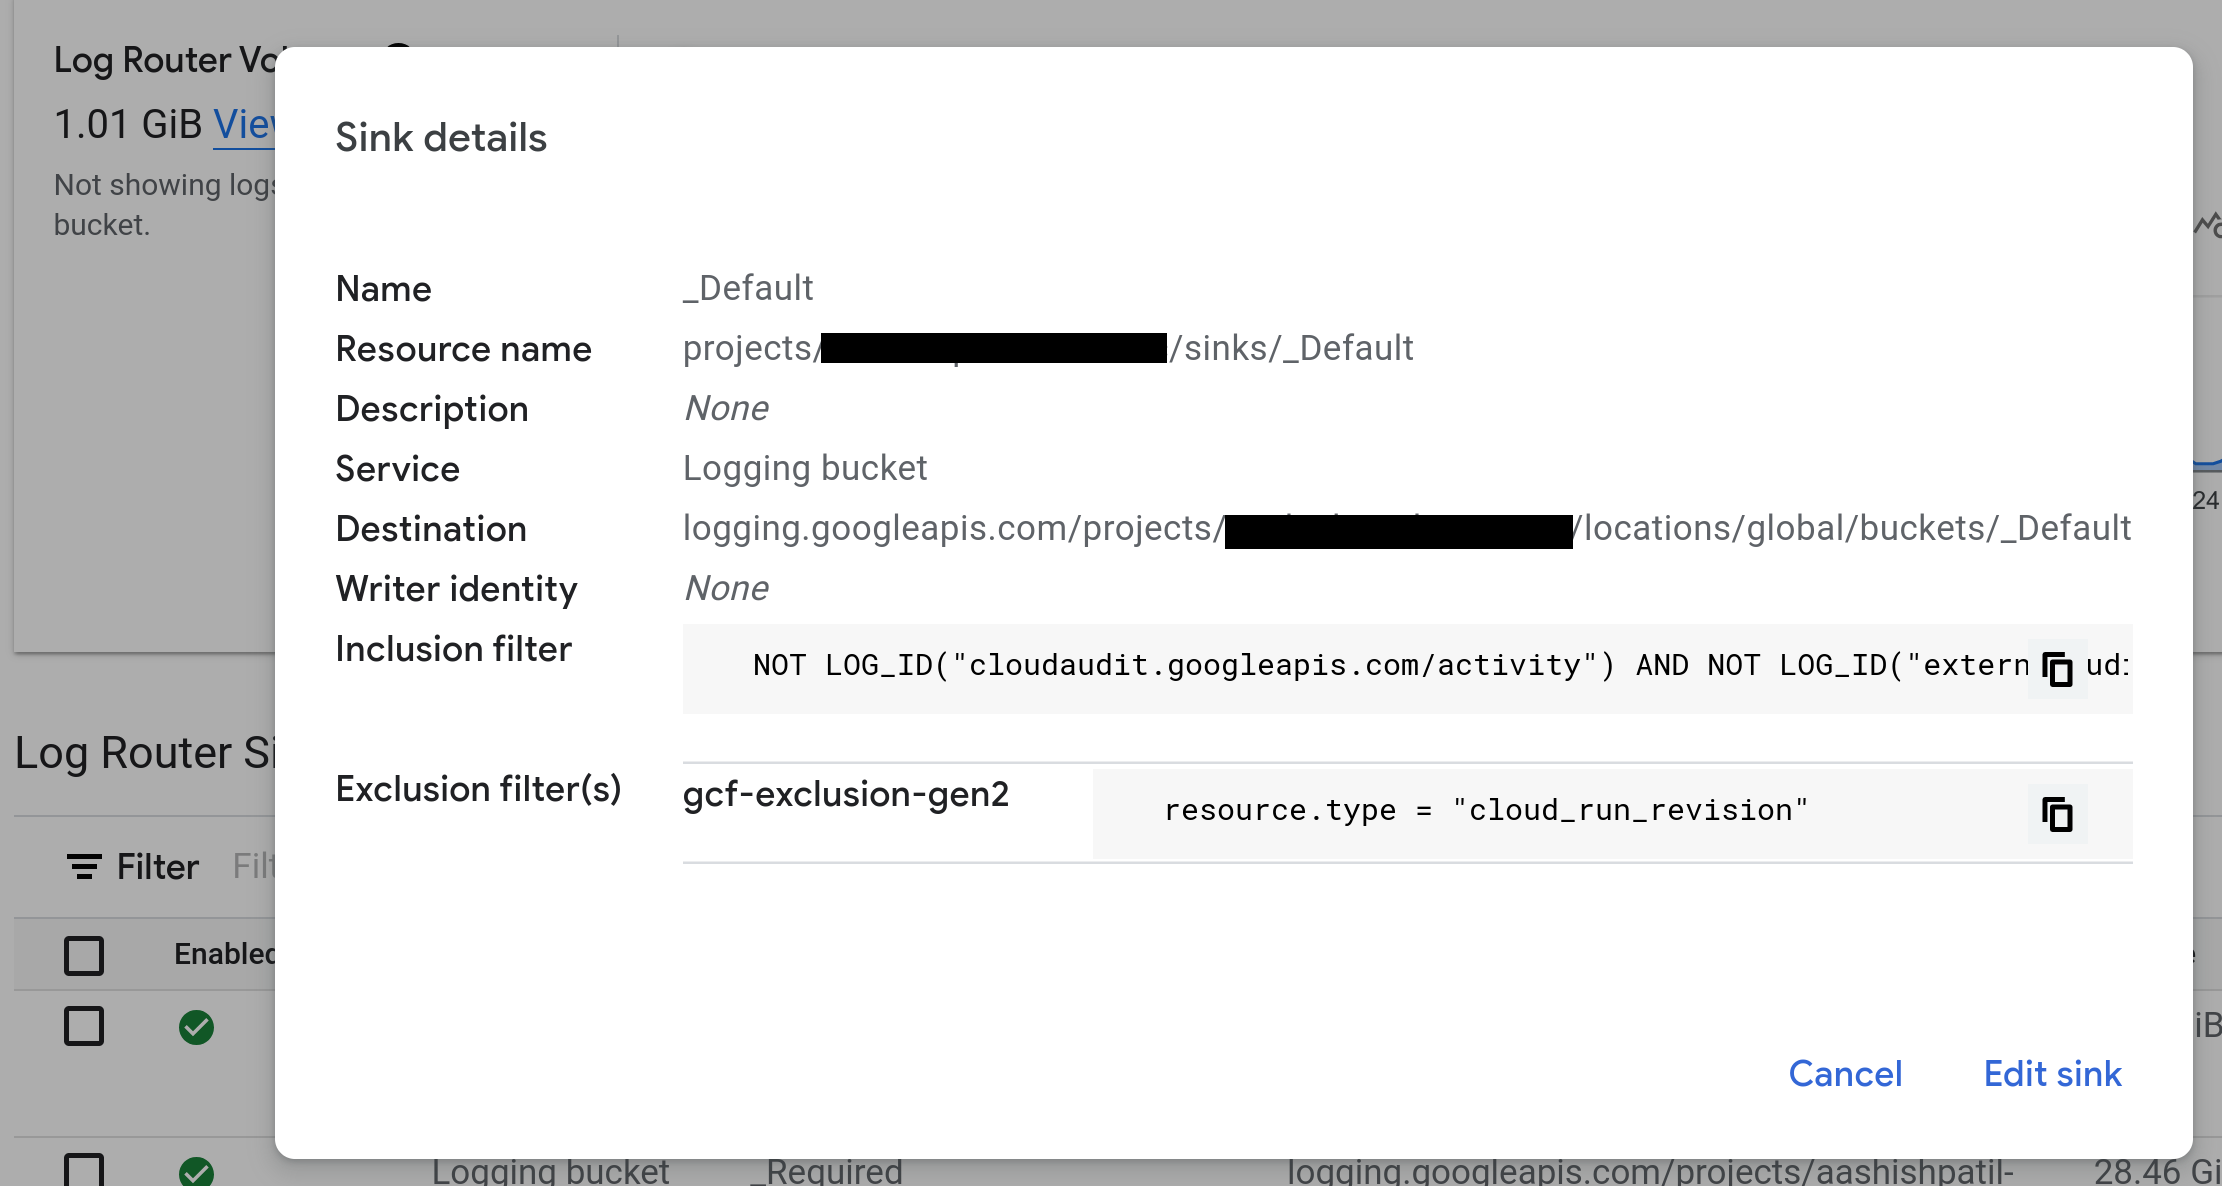 Screenshot of Console Log Router with View sink details highlighted